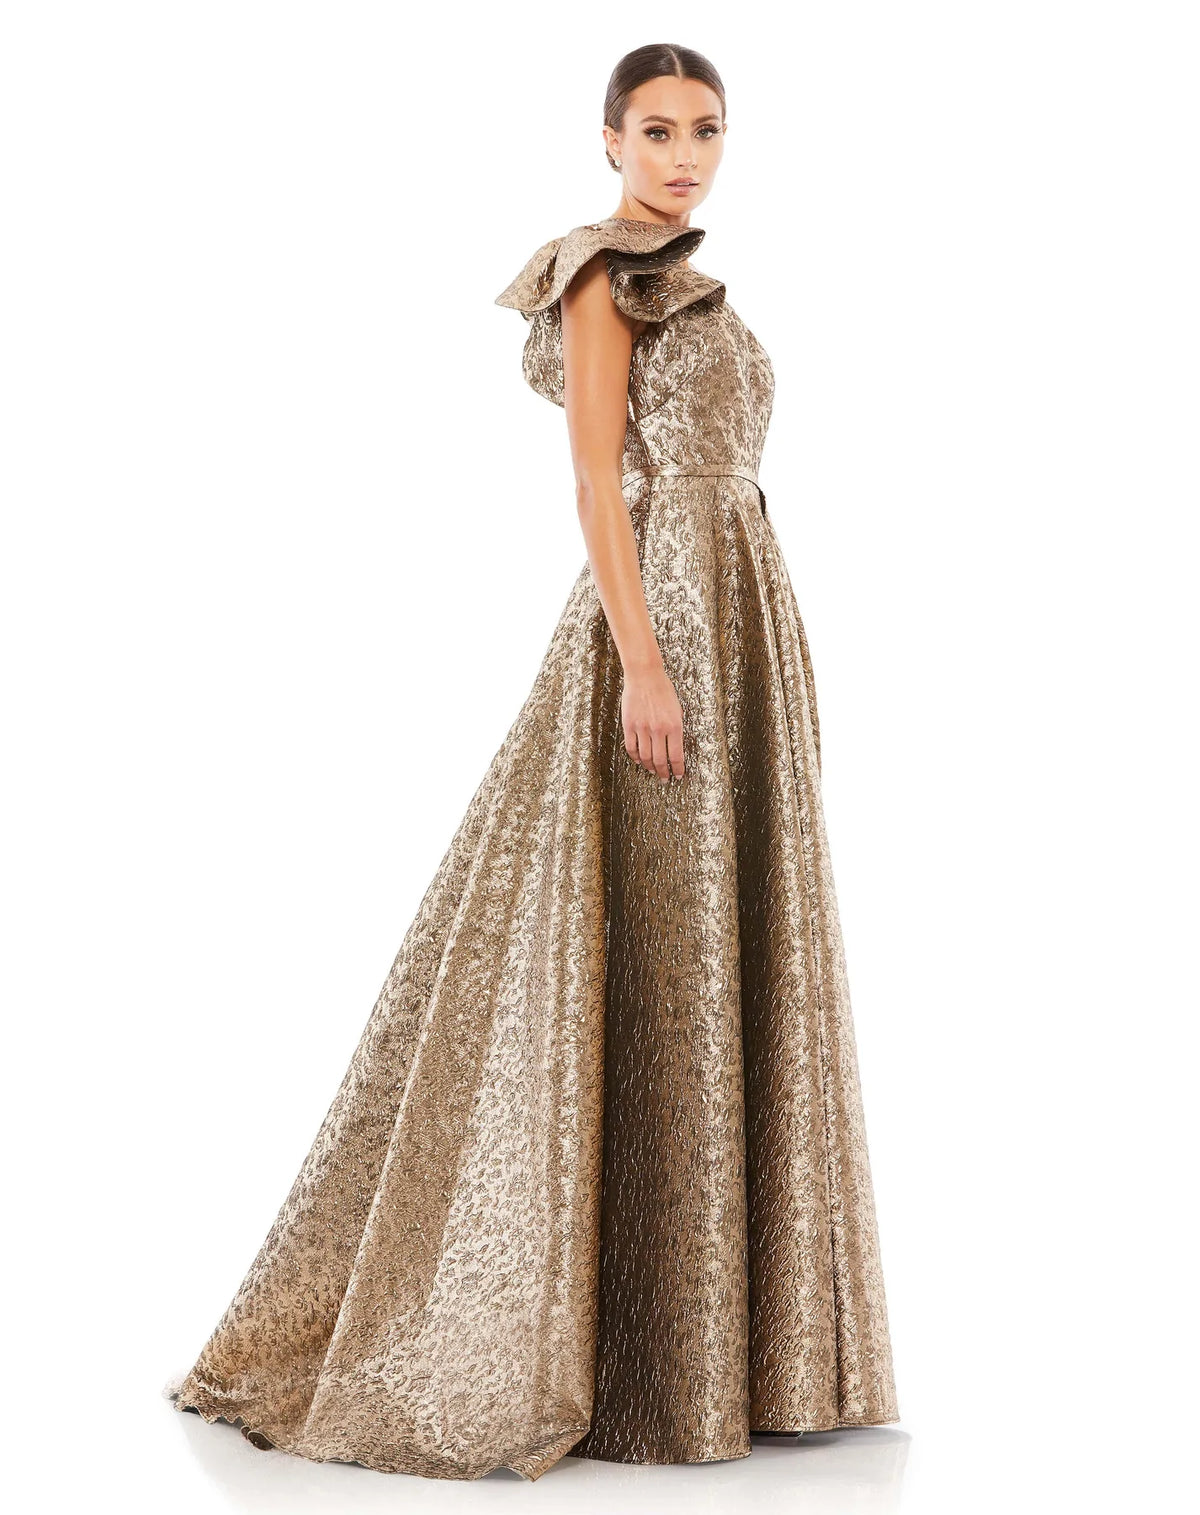 This stunningly elegant, one-shoulder metallic brocade antique gold, ball gown is a truly show-stopping evening dress accented with asymmetric chest detail, bow-detail on the shoulder, a cinched in waist and a beautiful full skirt with a thigh high split. This A line ball gown is perfect for proms, black-tie affairs, weddings and special events!